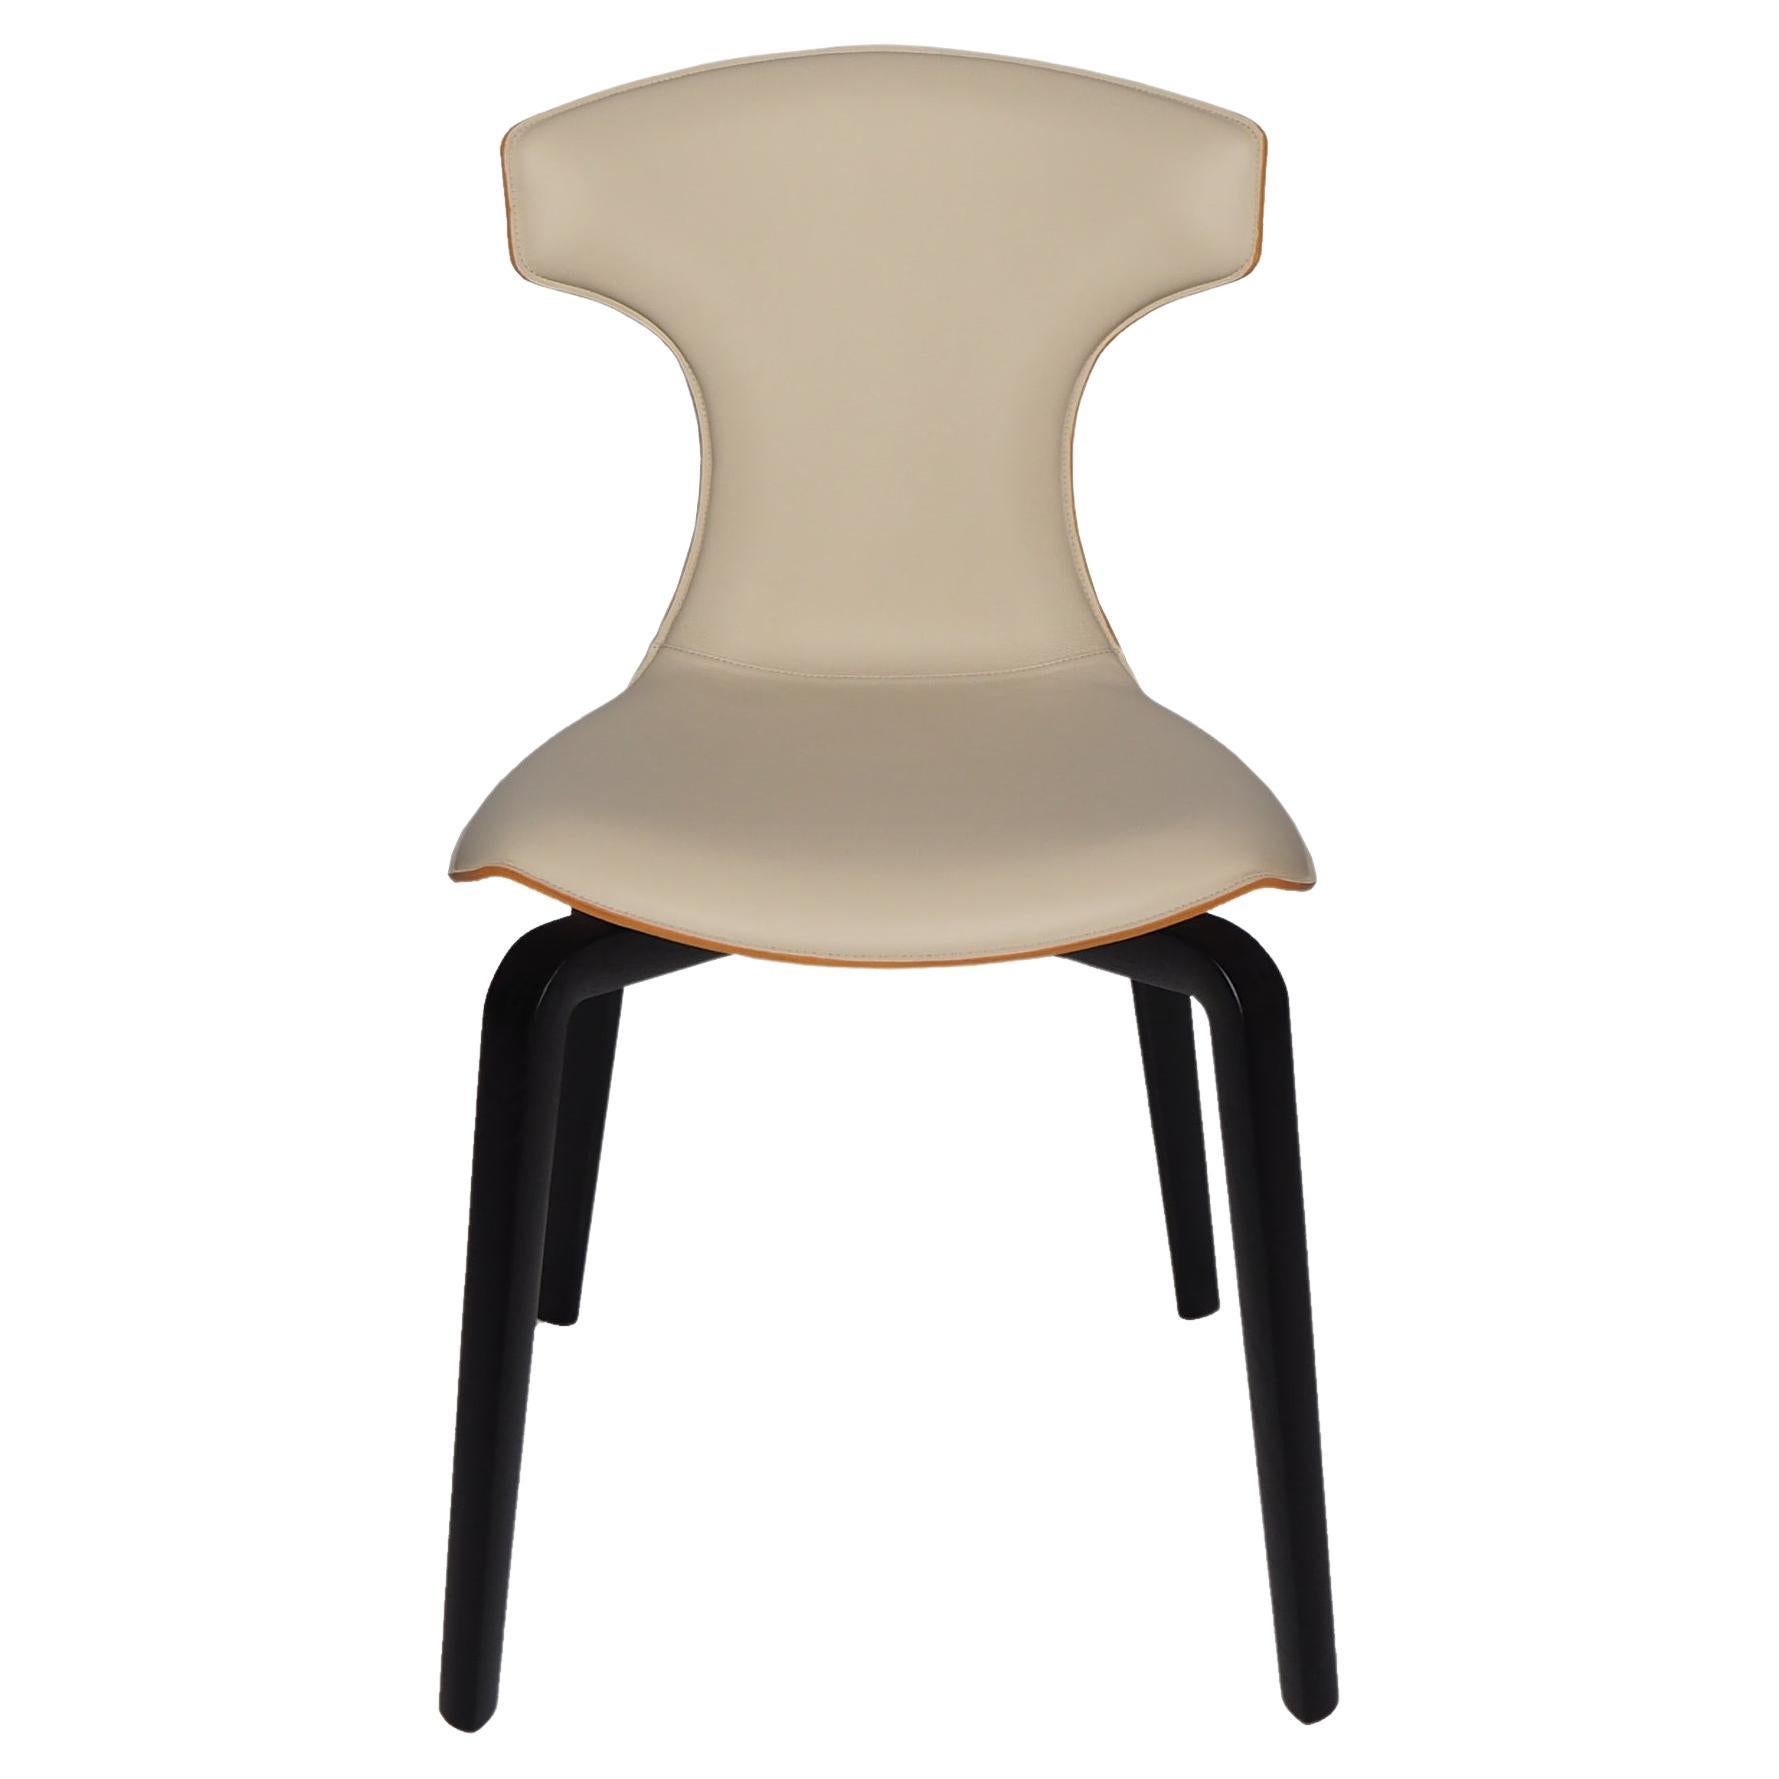 Montera Chair in Genuine Leather Pelle SC 51 Panna and Saddle Extra Cammello For Sale